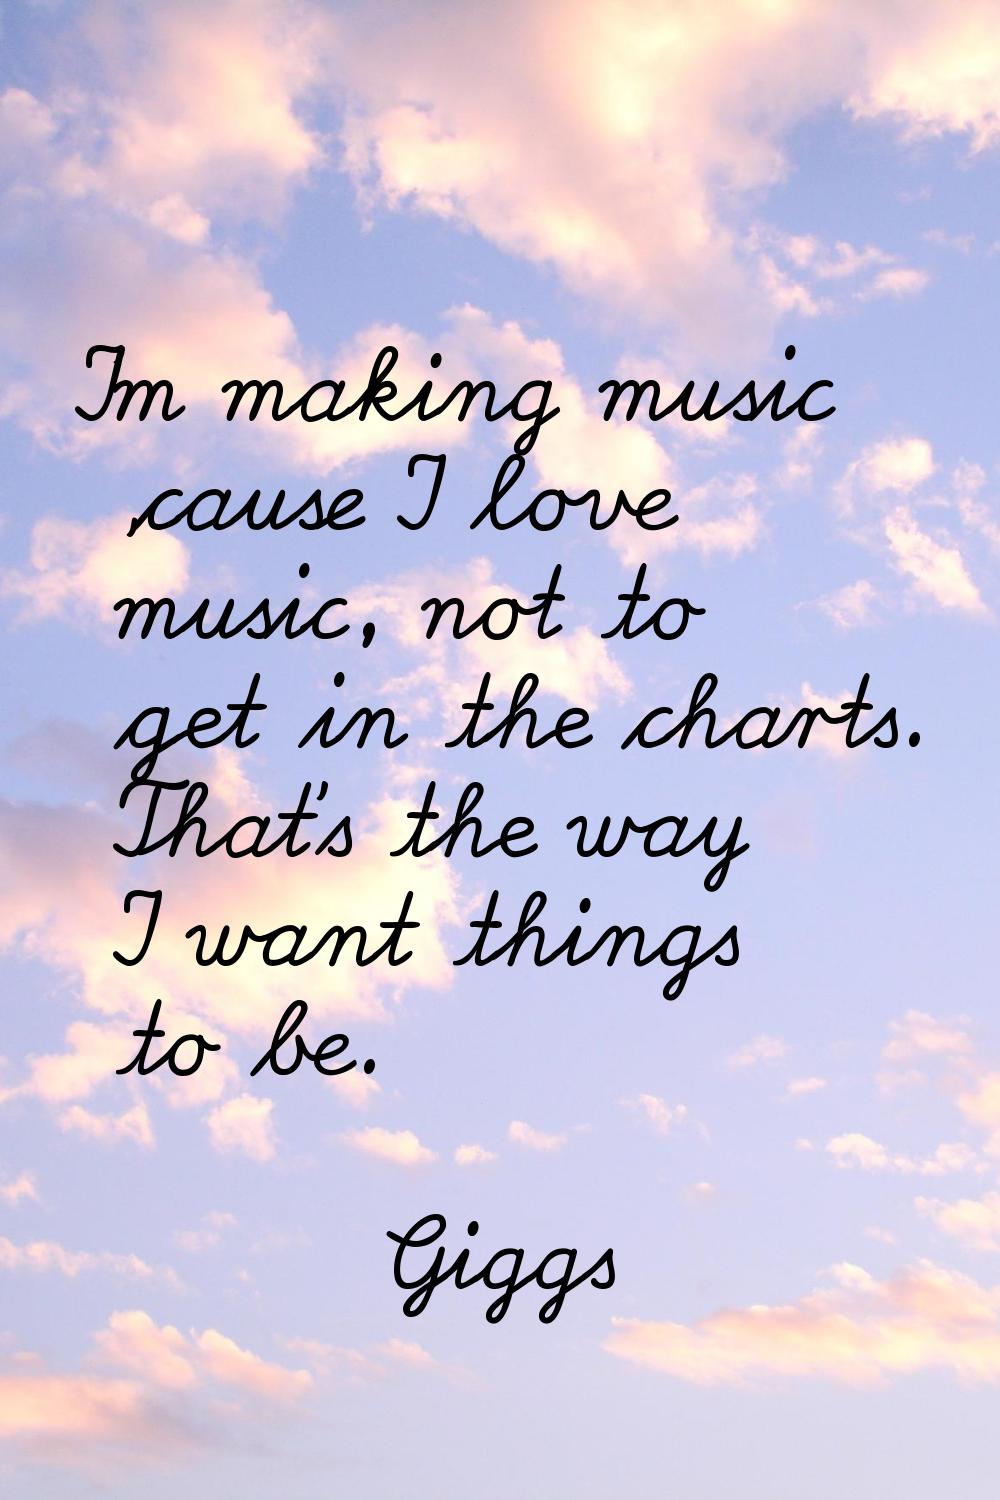 I'm making music 'cause I love music, not to get in the charts. That's the way I want things to be.